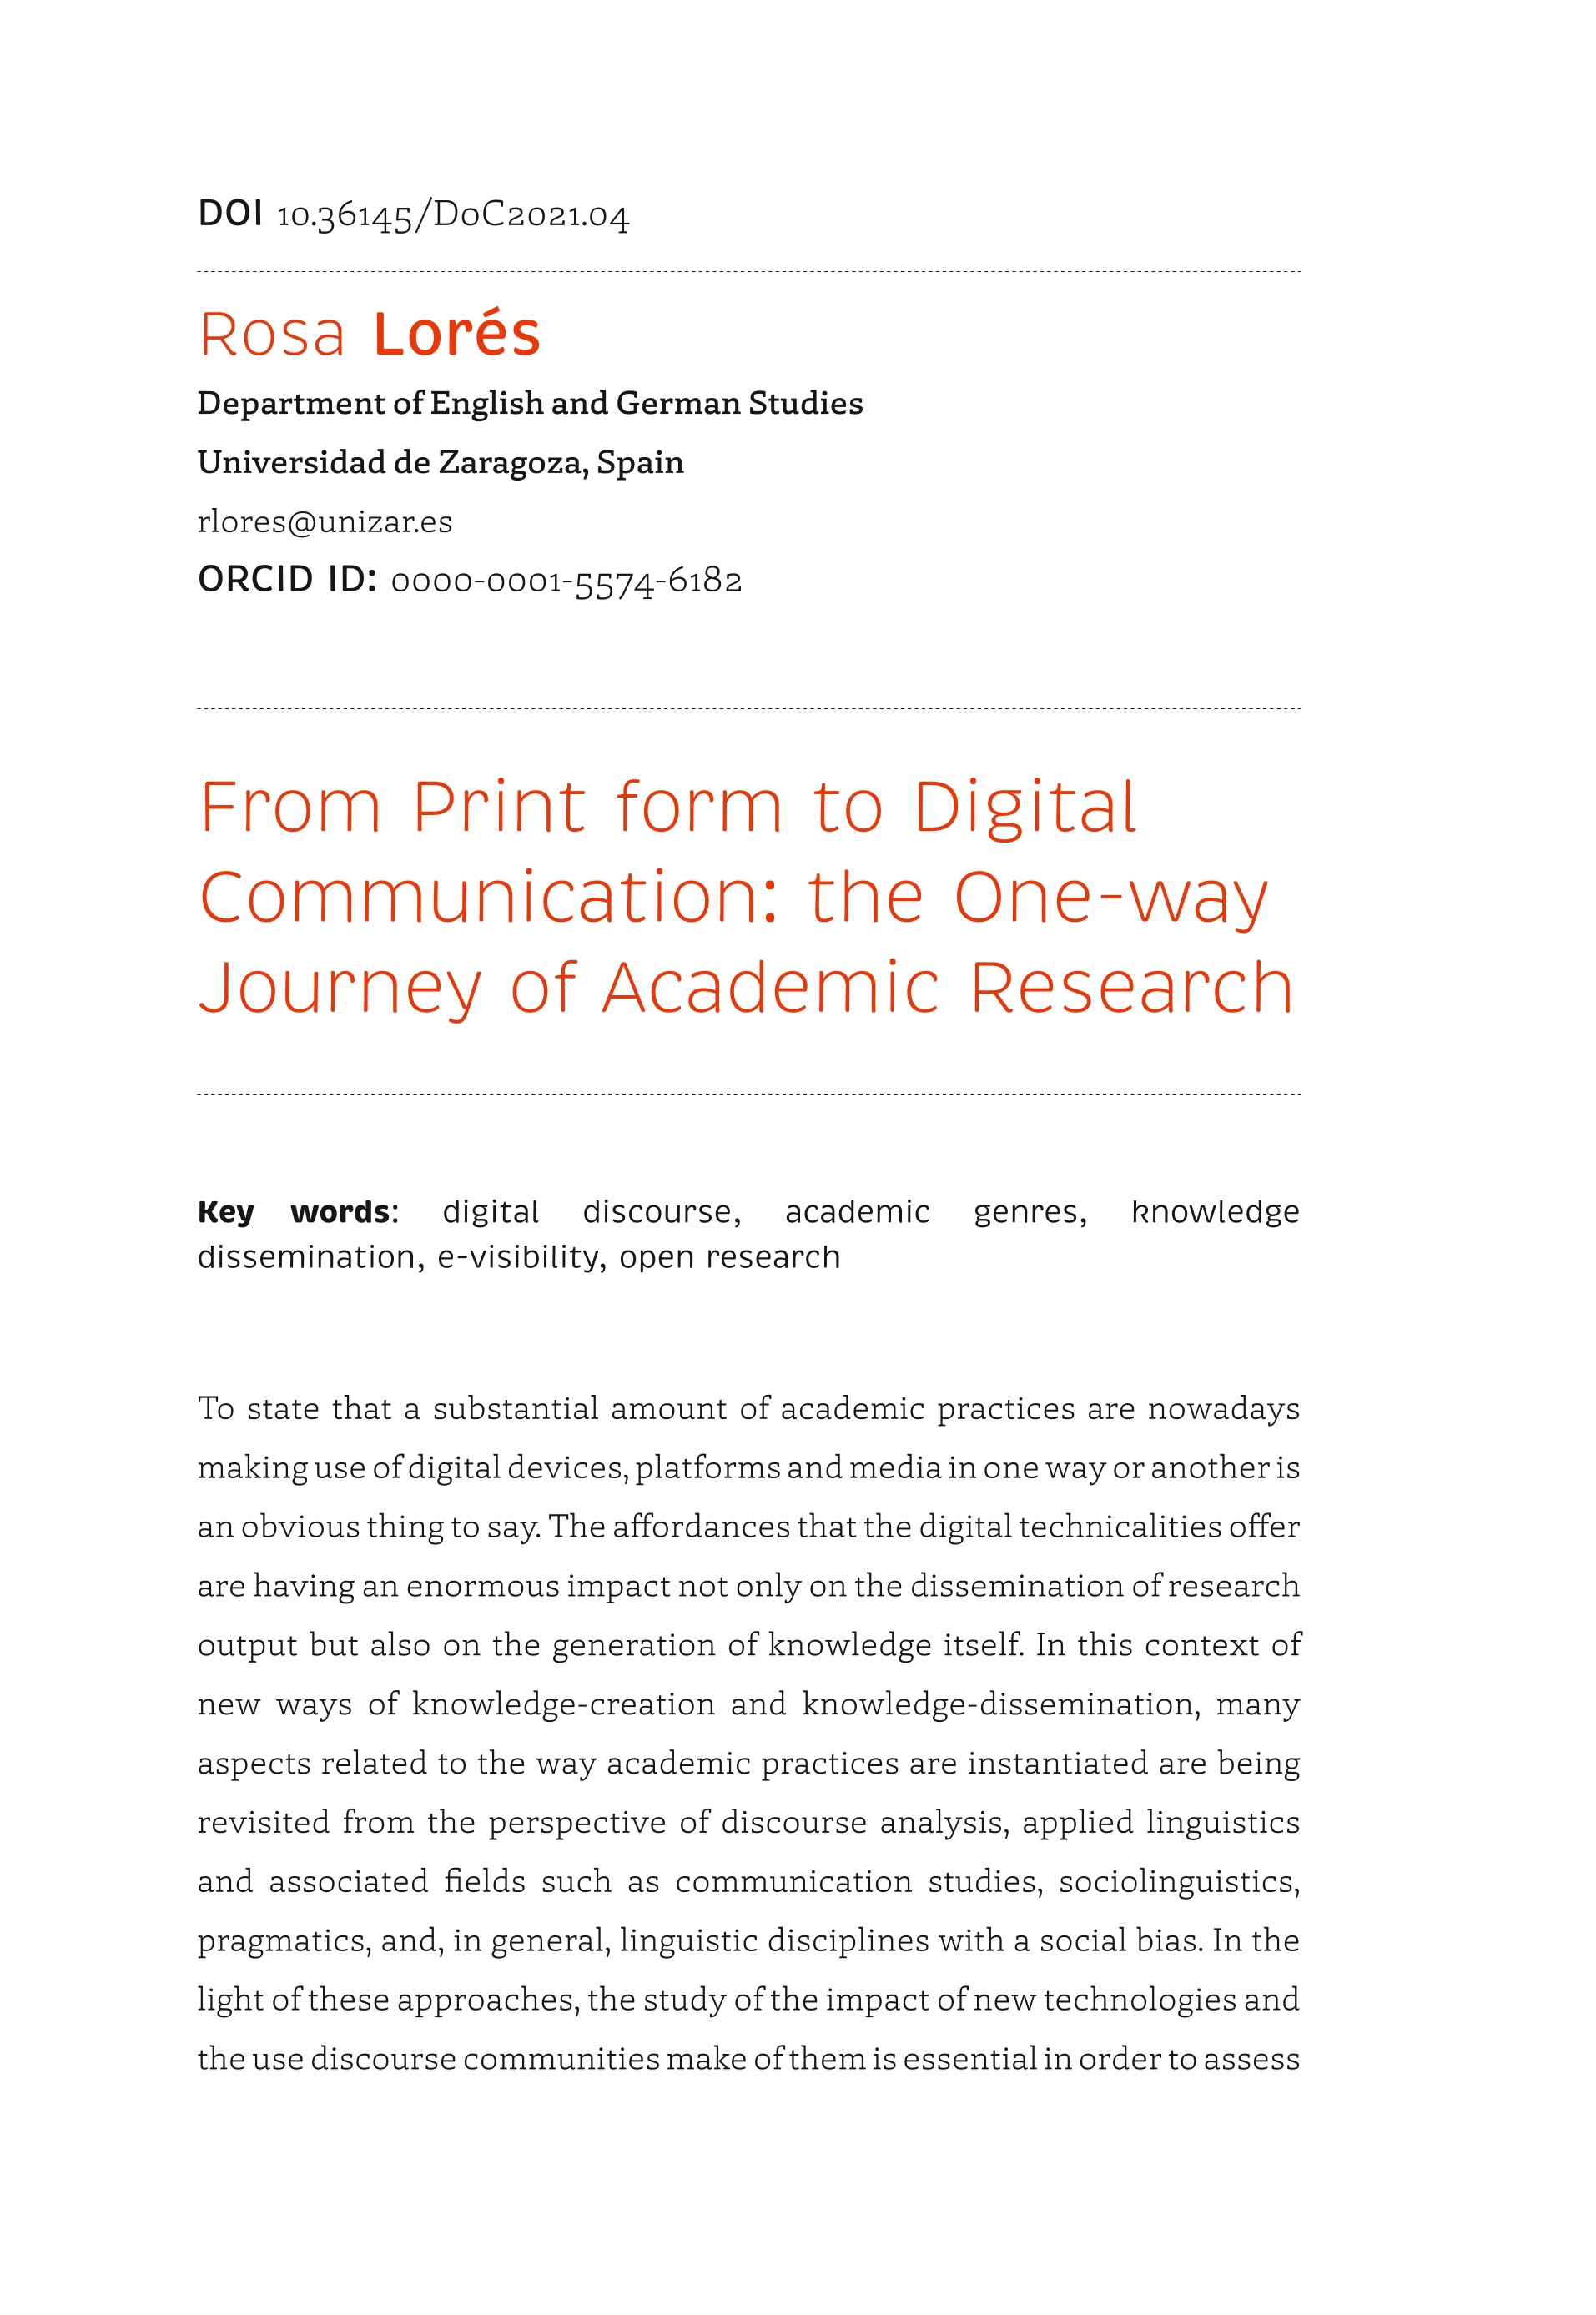 From print to digital communication: the one-way journey of academic research